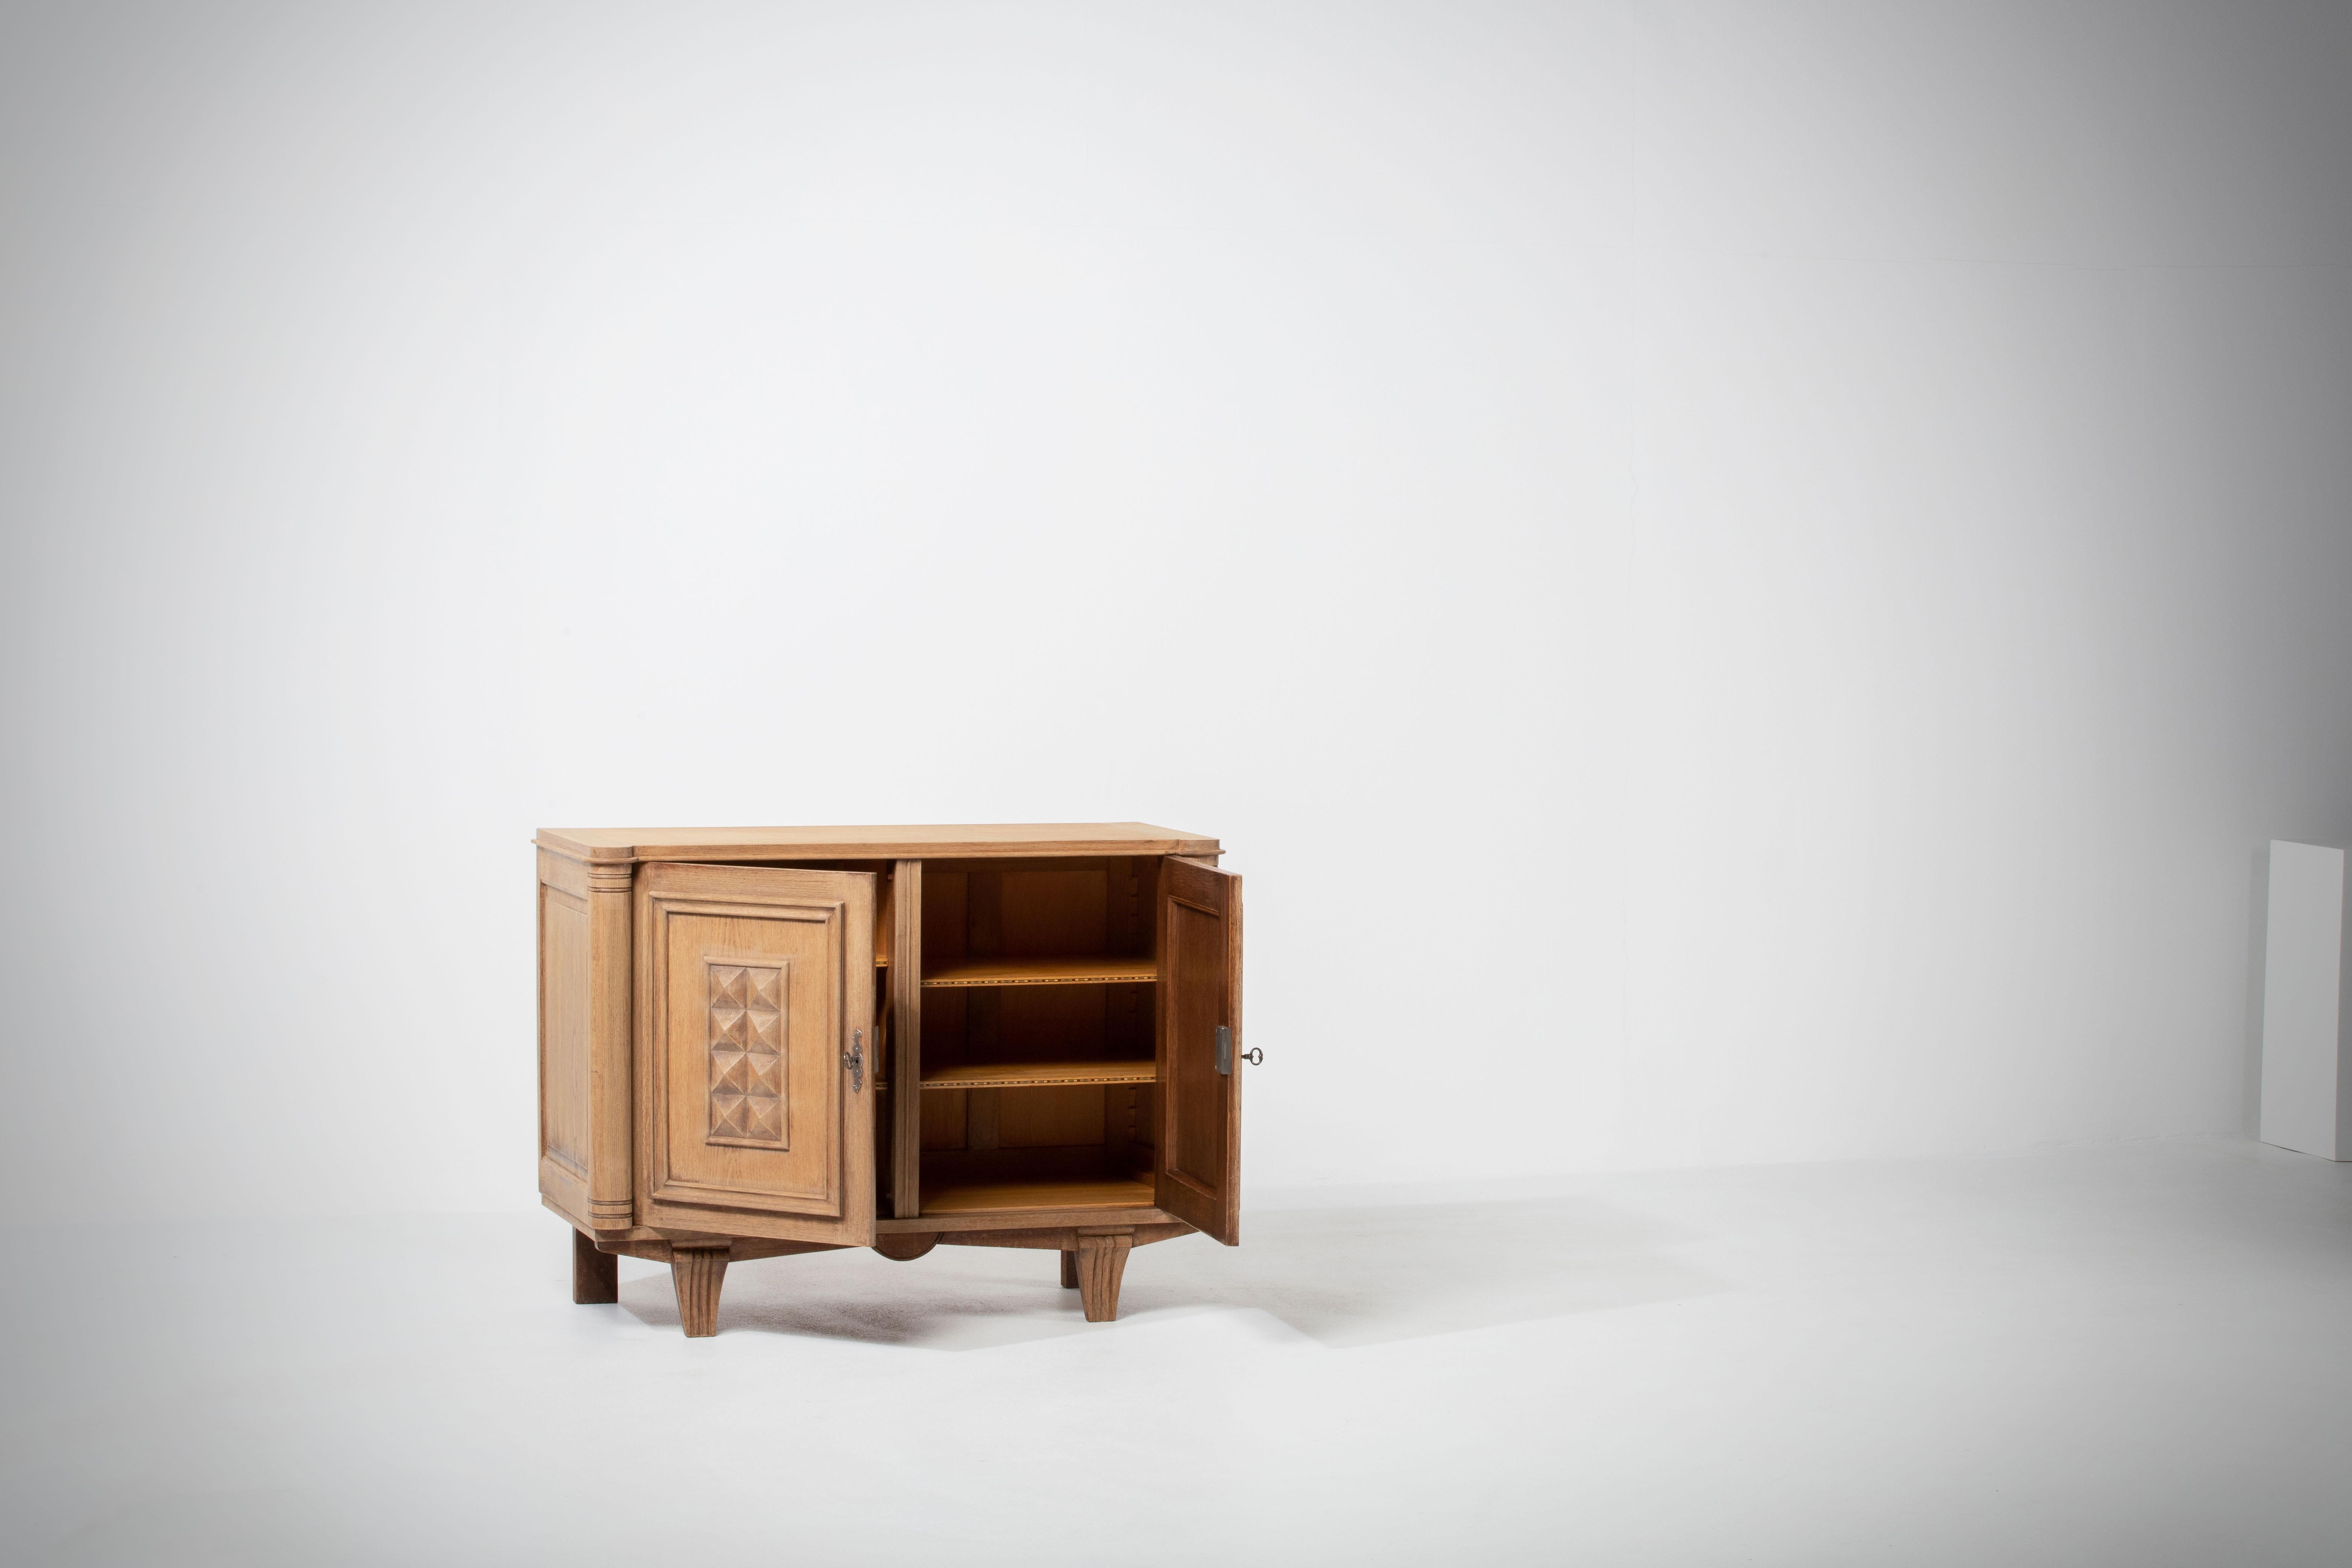 French Bleached Solid Oak Cabinet with Graphic Details, France, 1940s